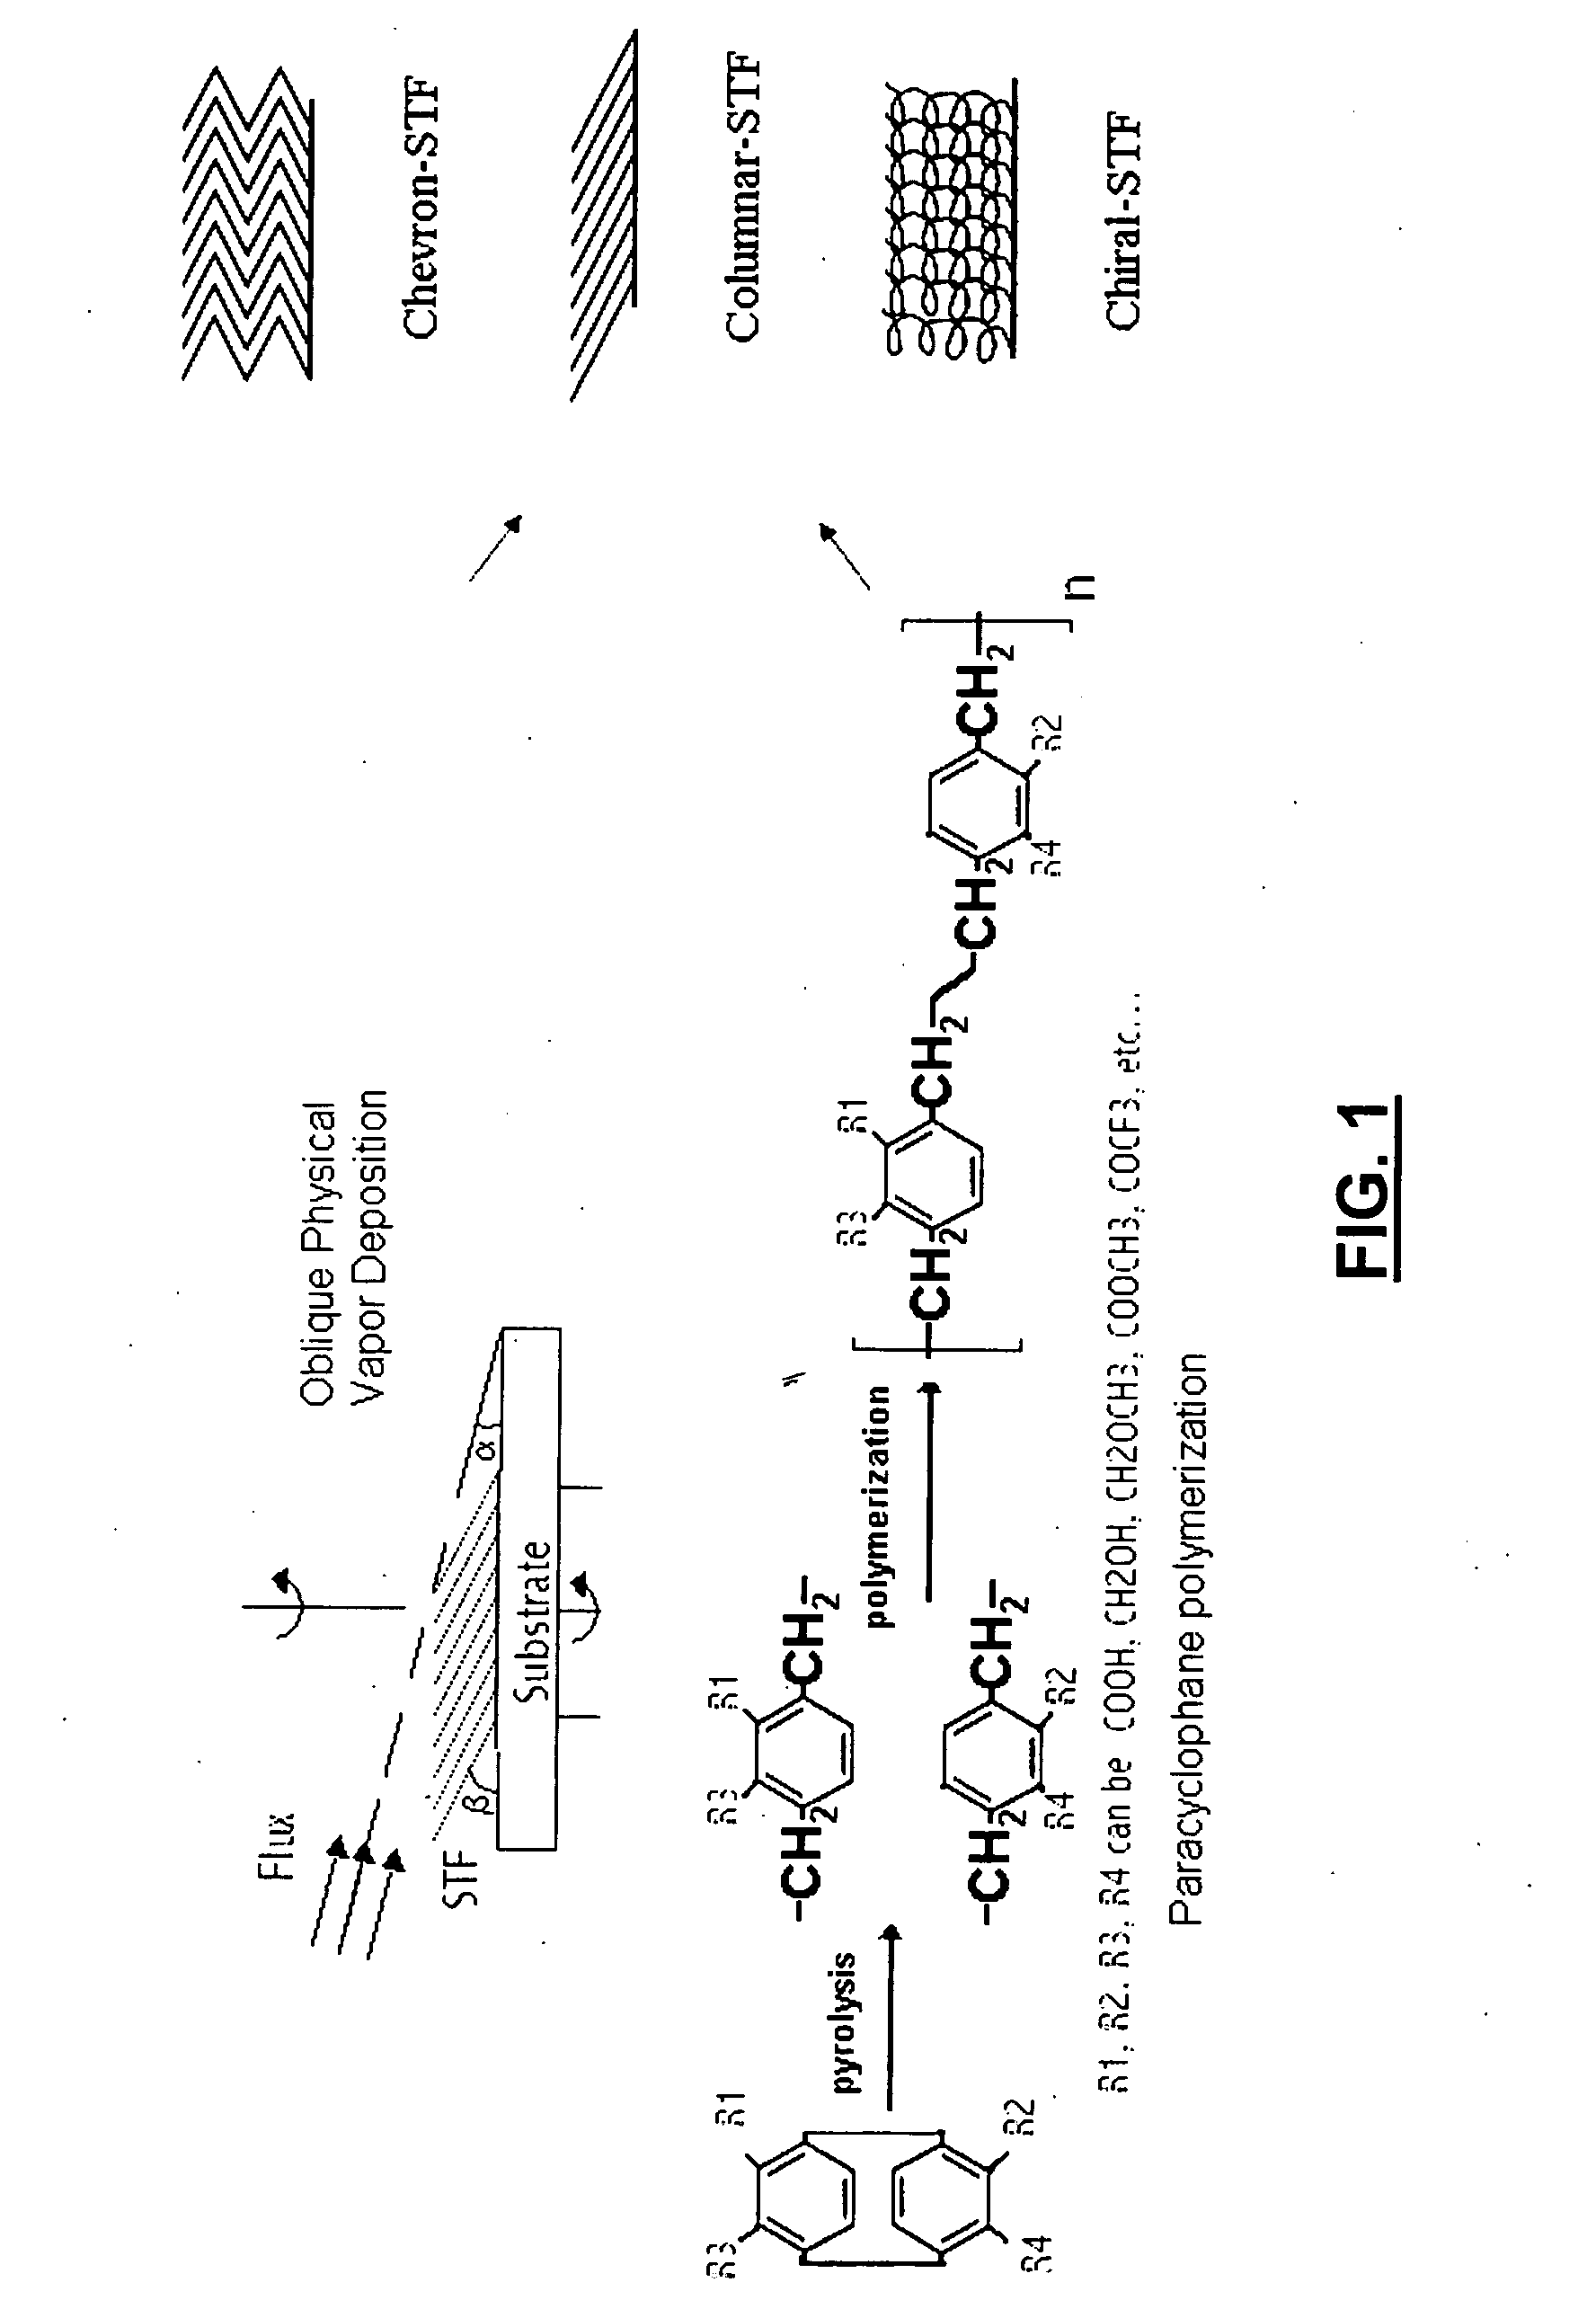 Method and systems for forming and using nanoengineered sculptured thin films